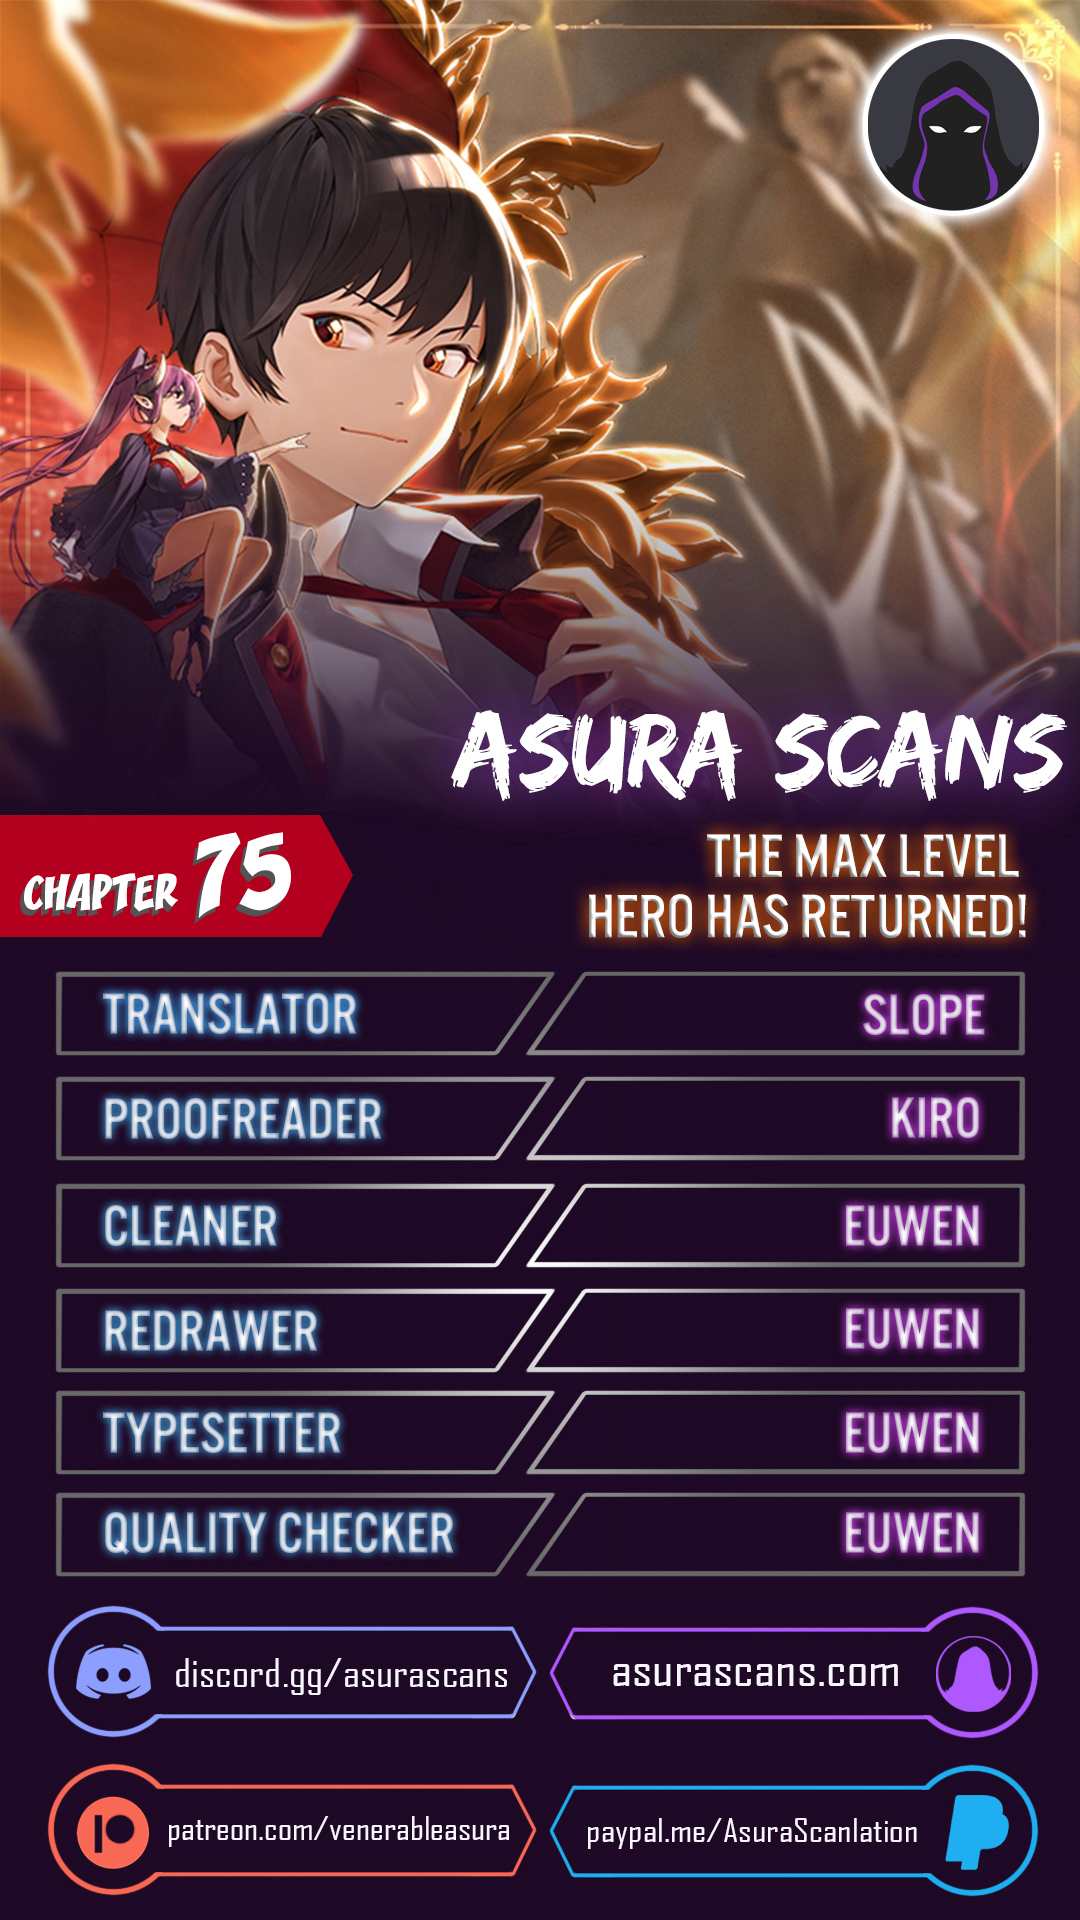 The MAX leveled hero will return! Chapter 75